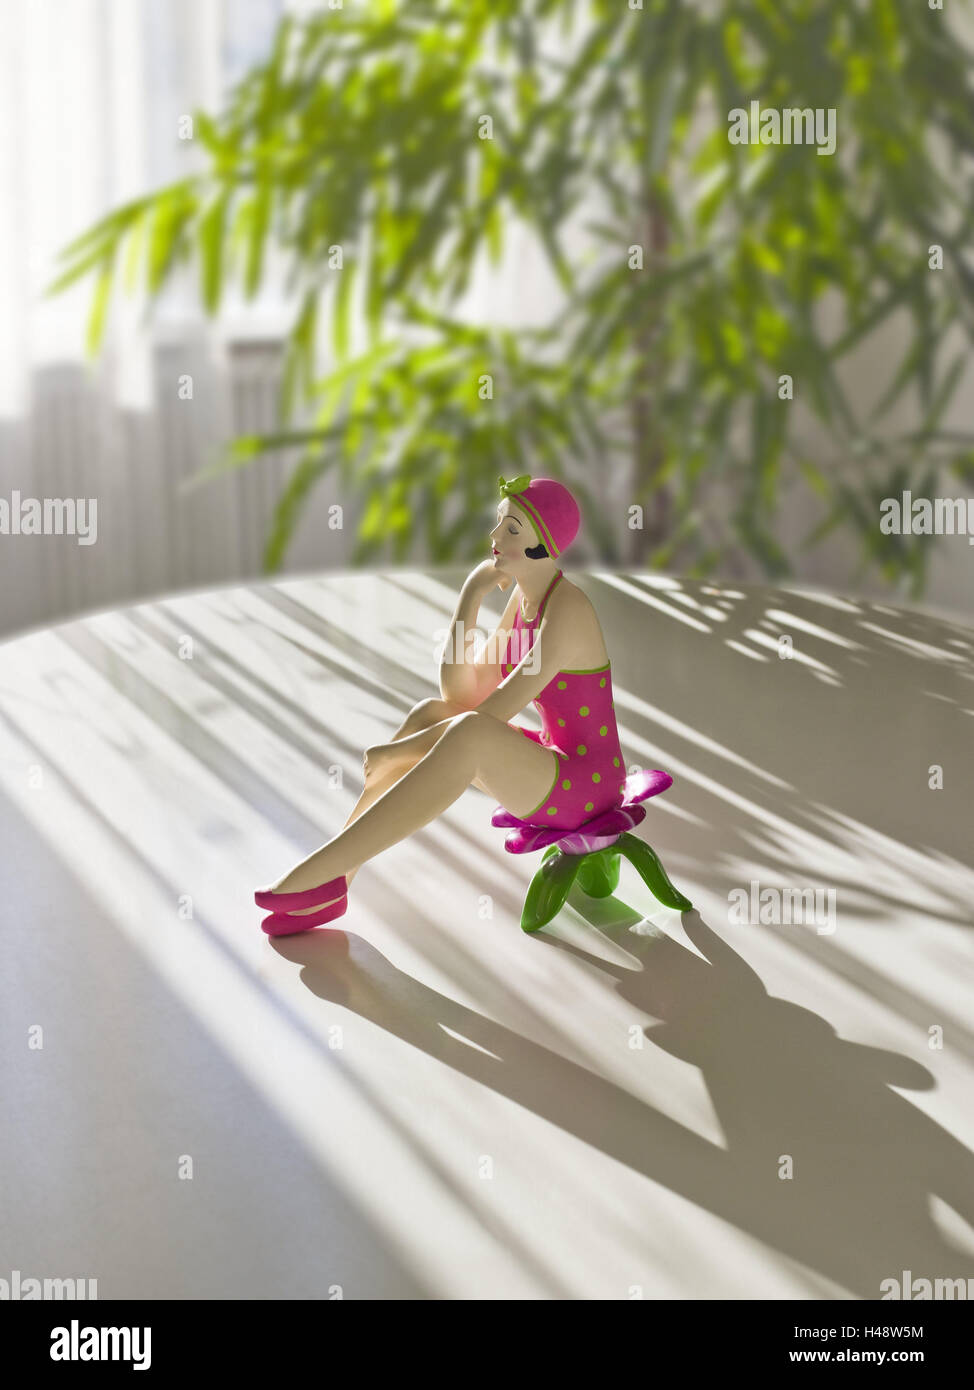 Ceramics figure, decoration, woman, seated, figure, ceramics, table, flat, green plant, light, brightly, sunlight, table appointments, indoor plant, shade, beams light, sunlight, icon, design, cosiness, relaxating, rest, thought, recreation, rest, vacation, Stock Photo